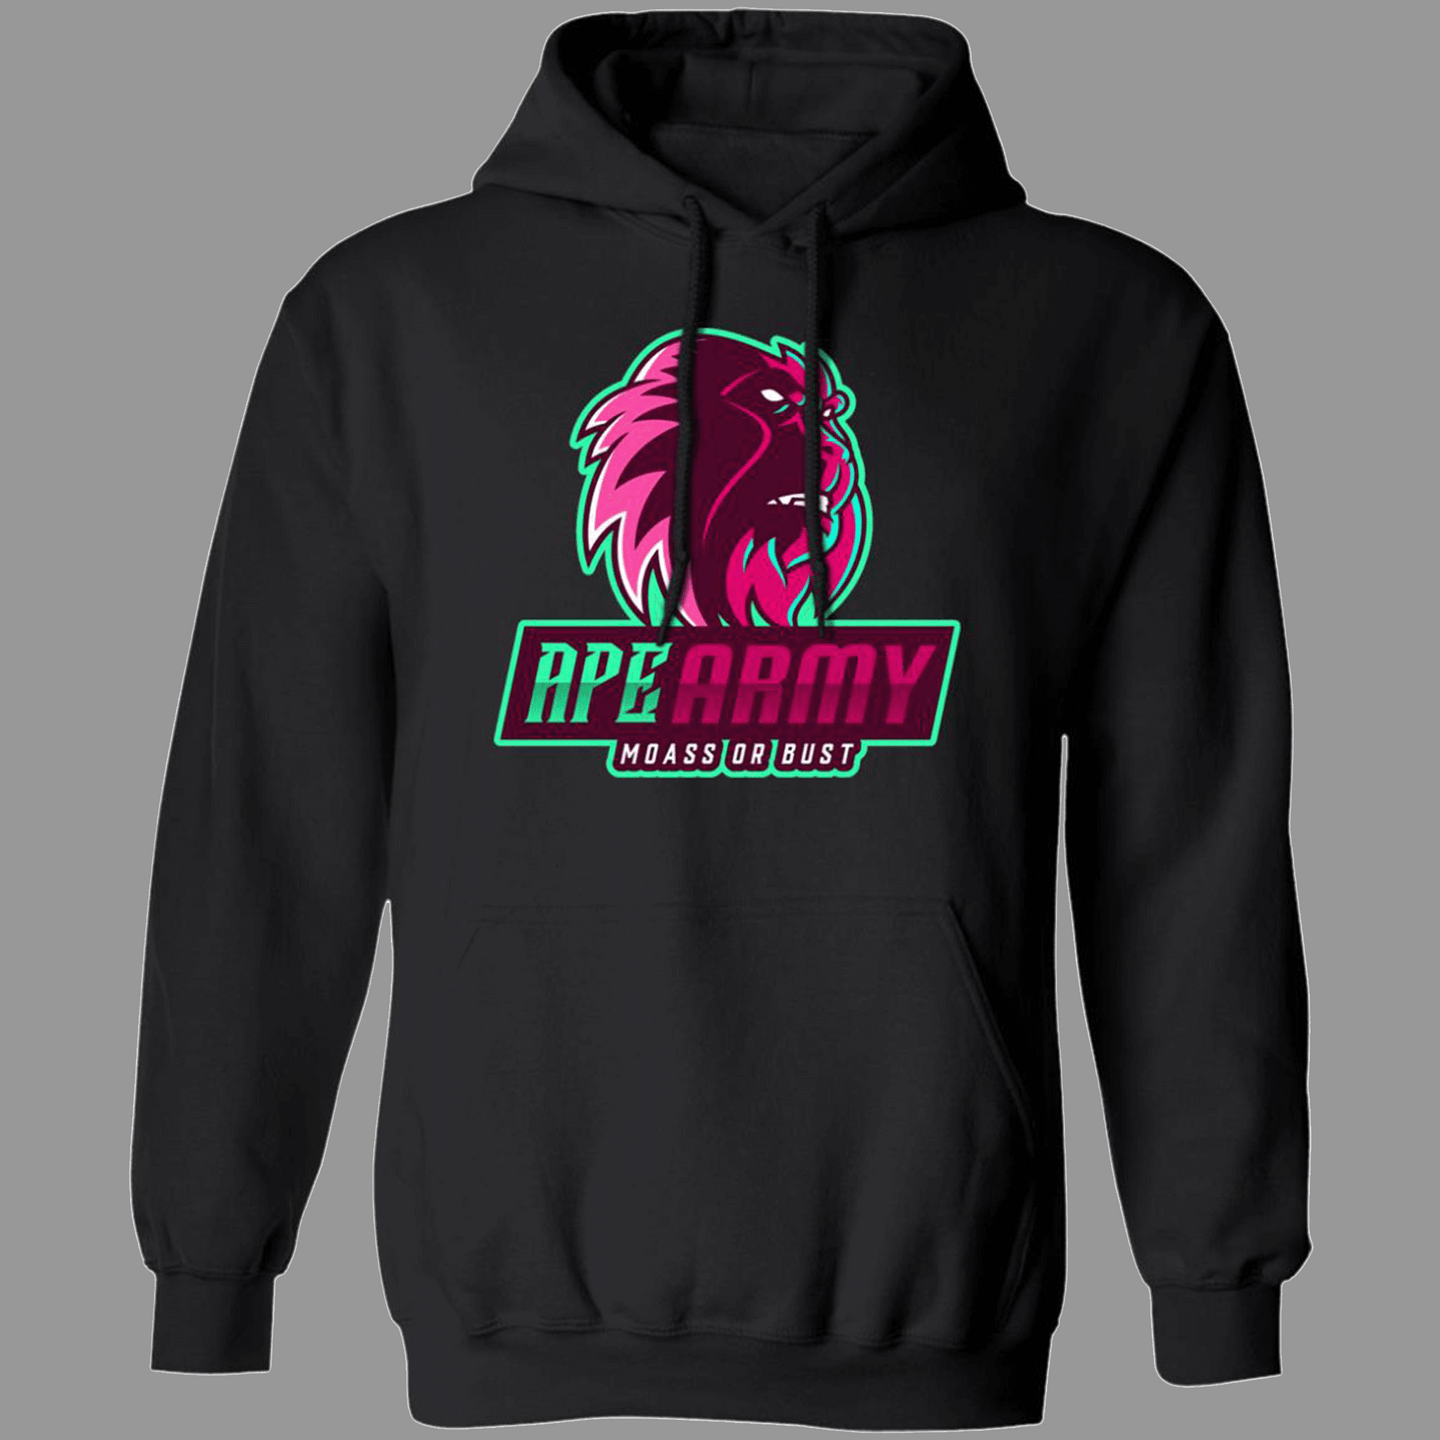 Ape Army MOASS or Bust Pullover Hoodies & Sweatshirts